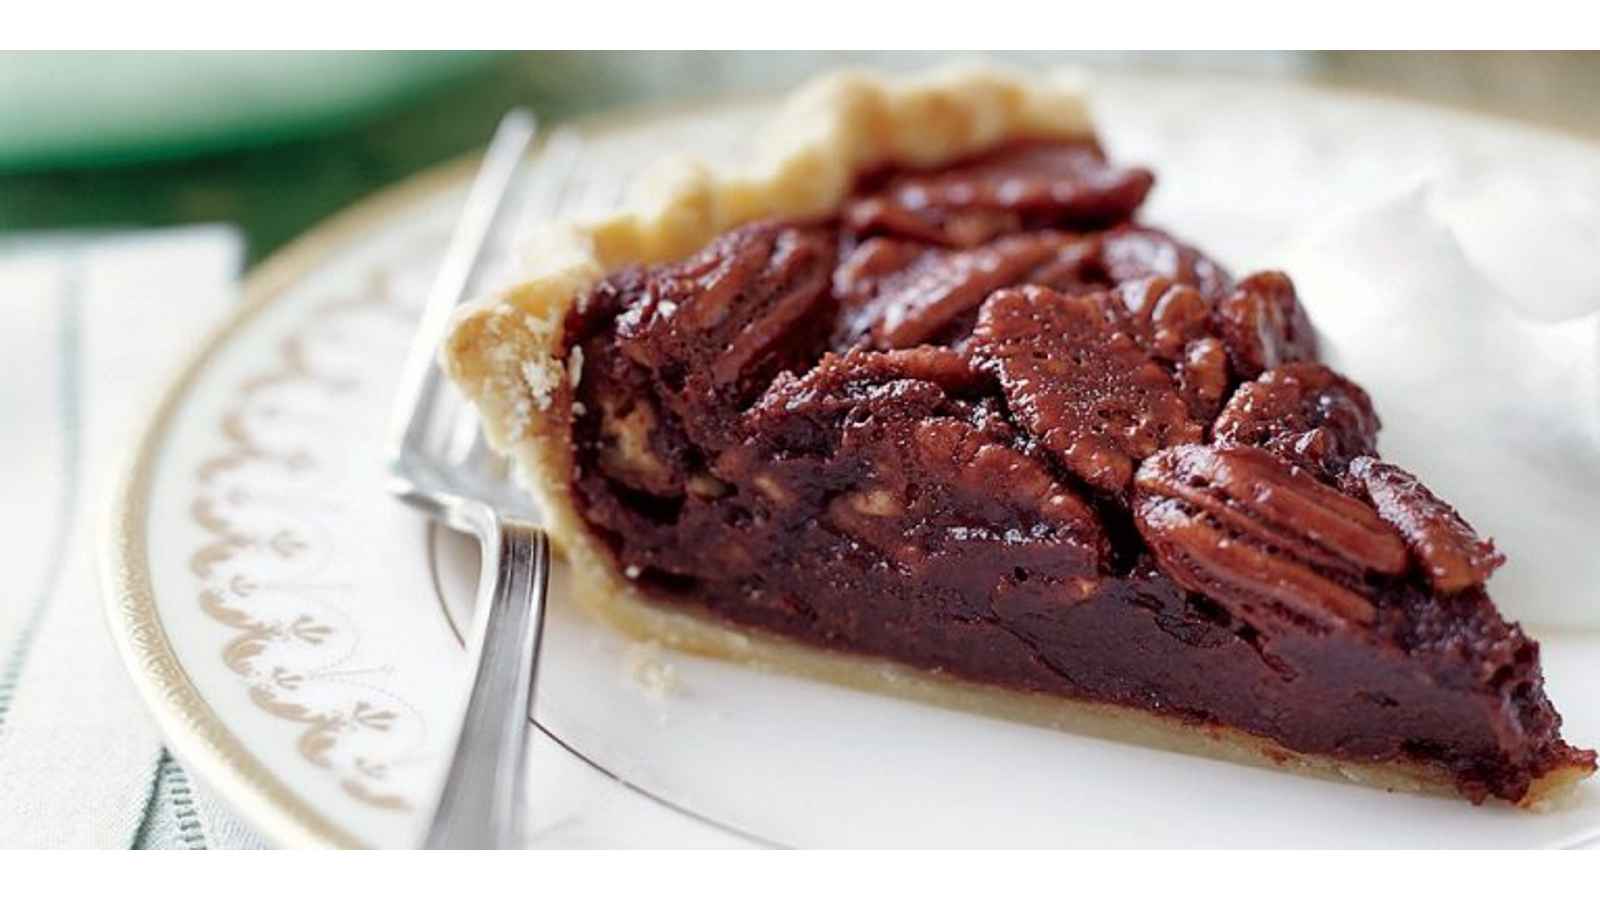 National Chocolate Pecan Pie Day 2023: Date, History, Facts about National Chocolate Pecan Pie Day